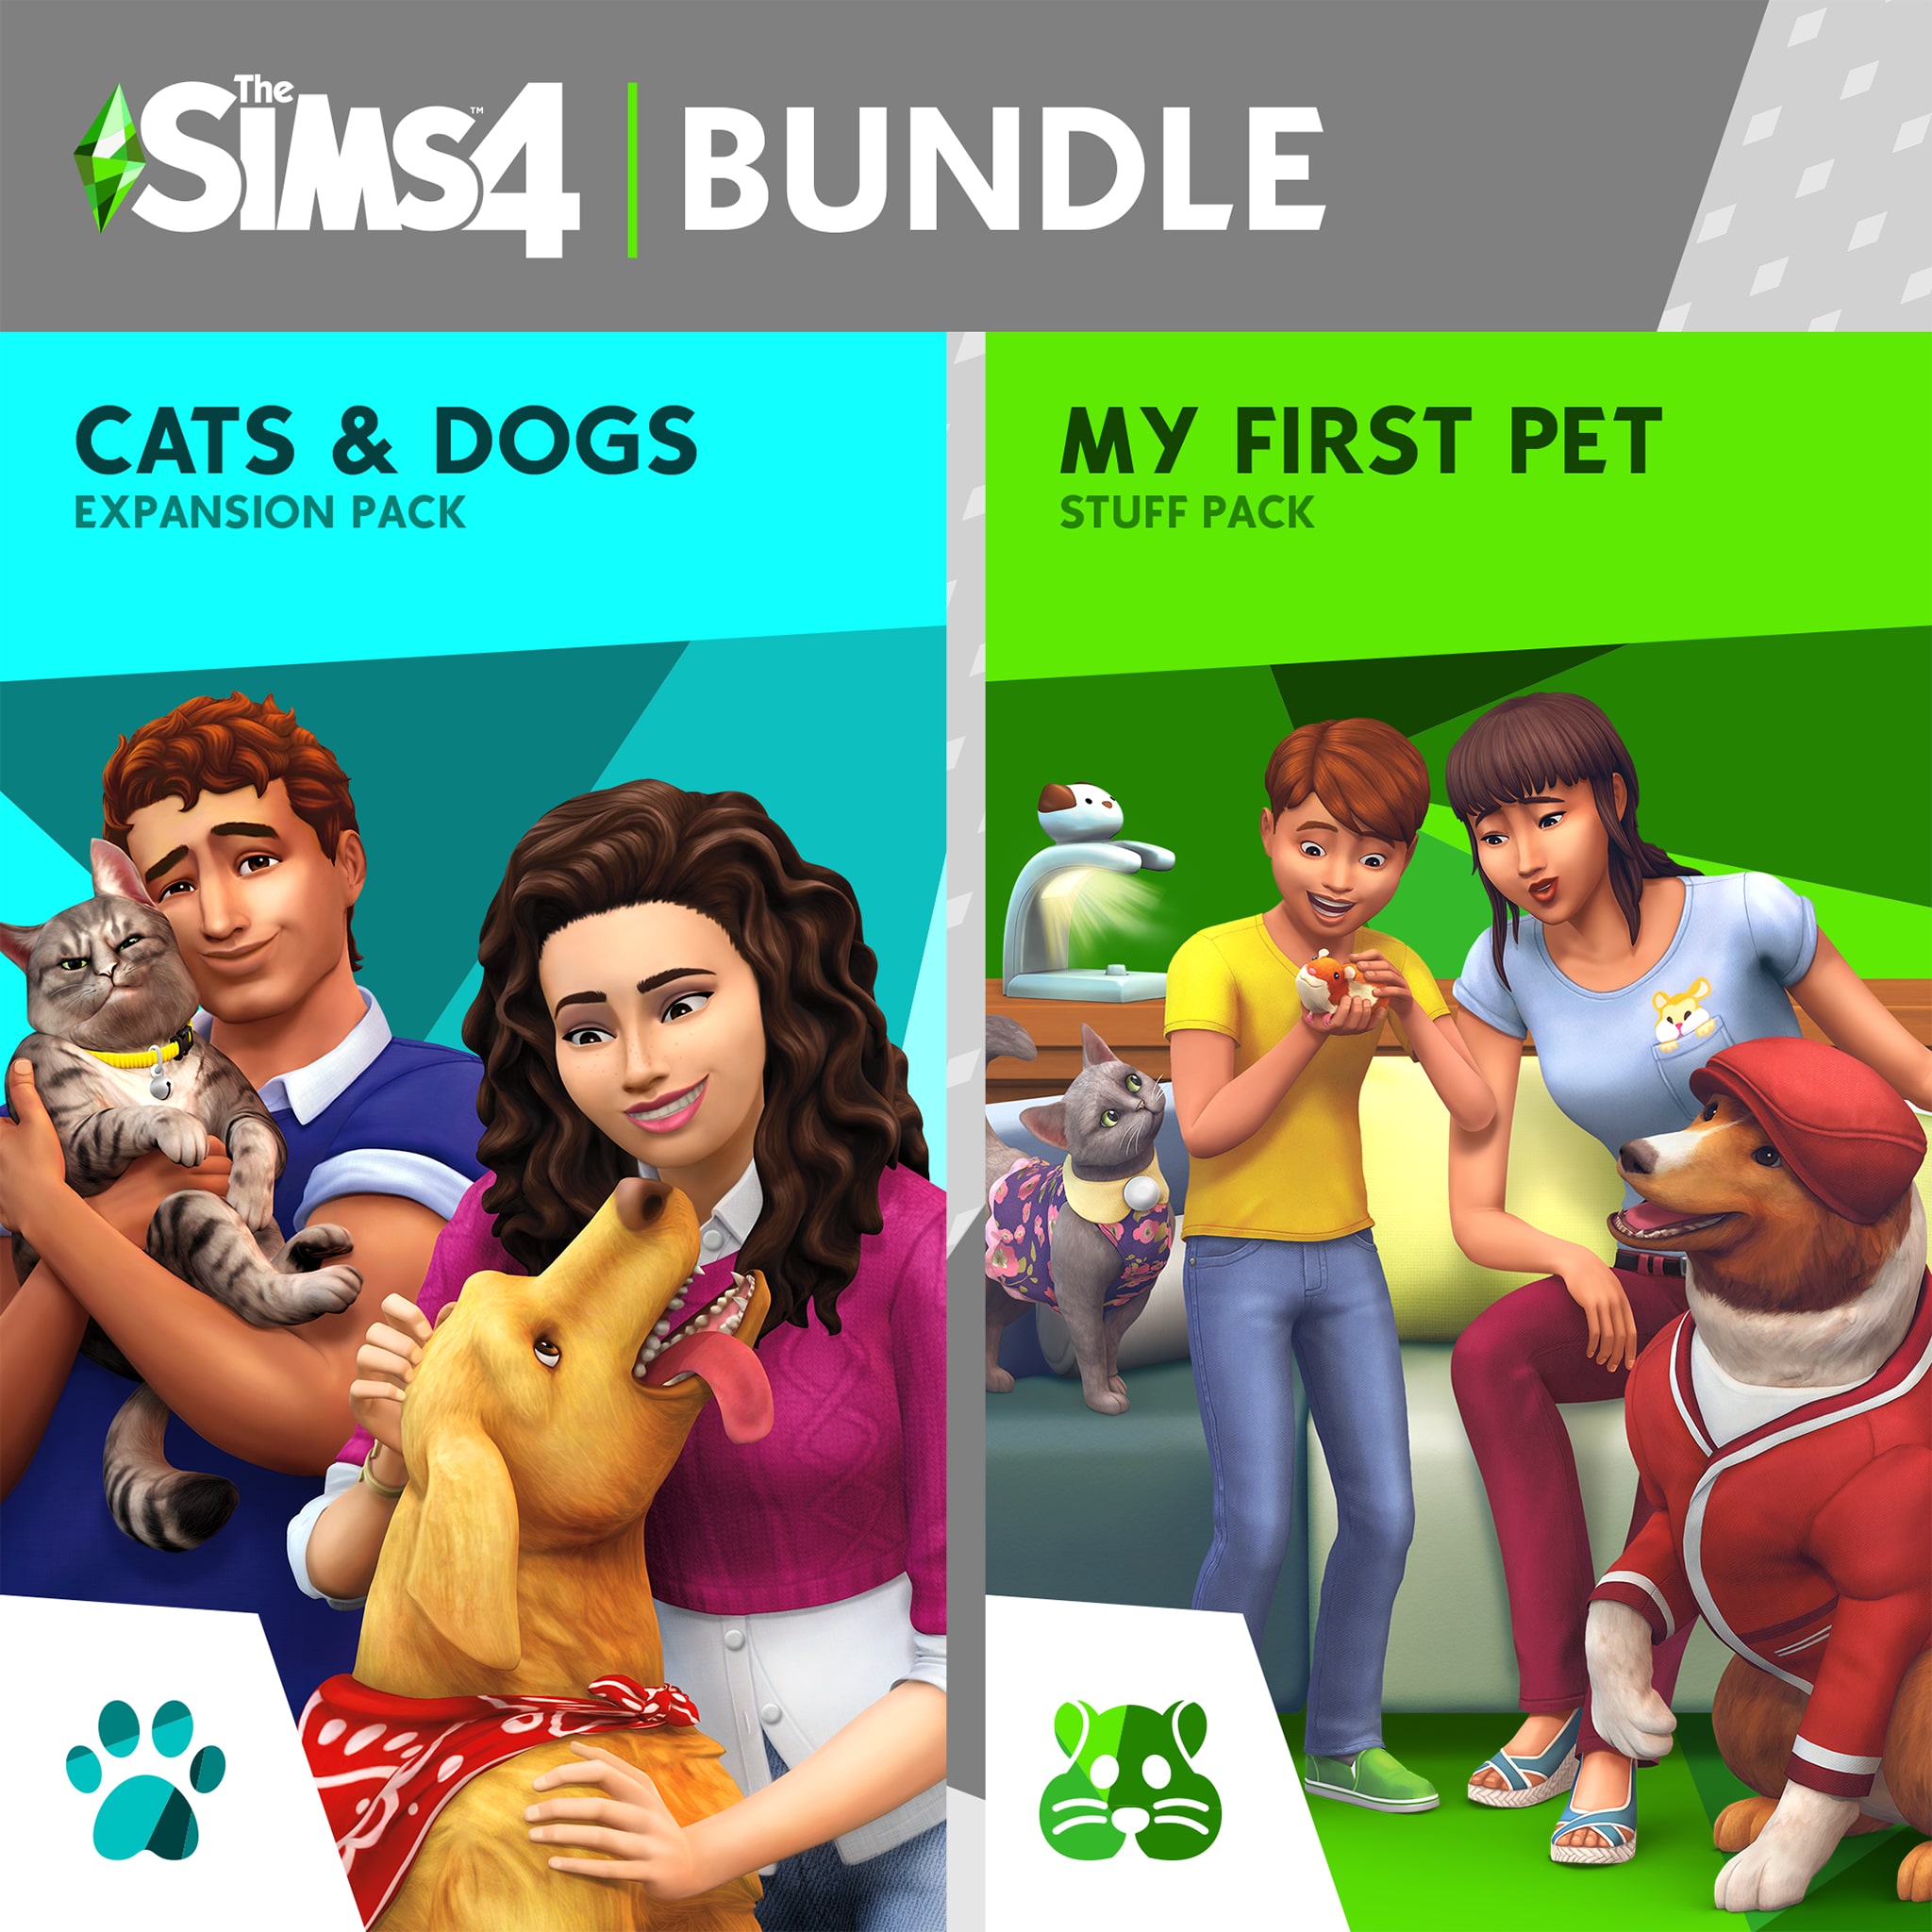 sims 4 cat and dog key generate